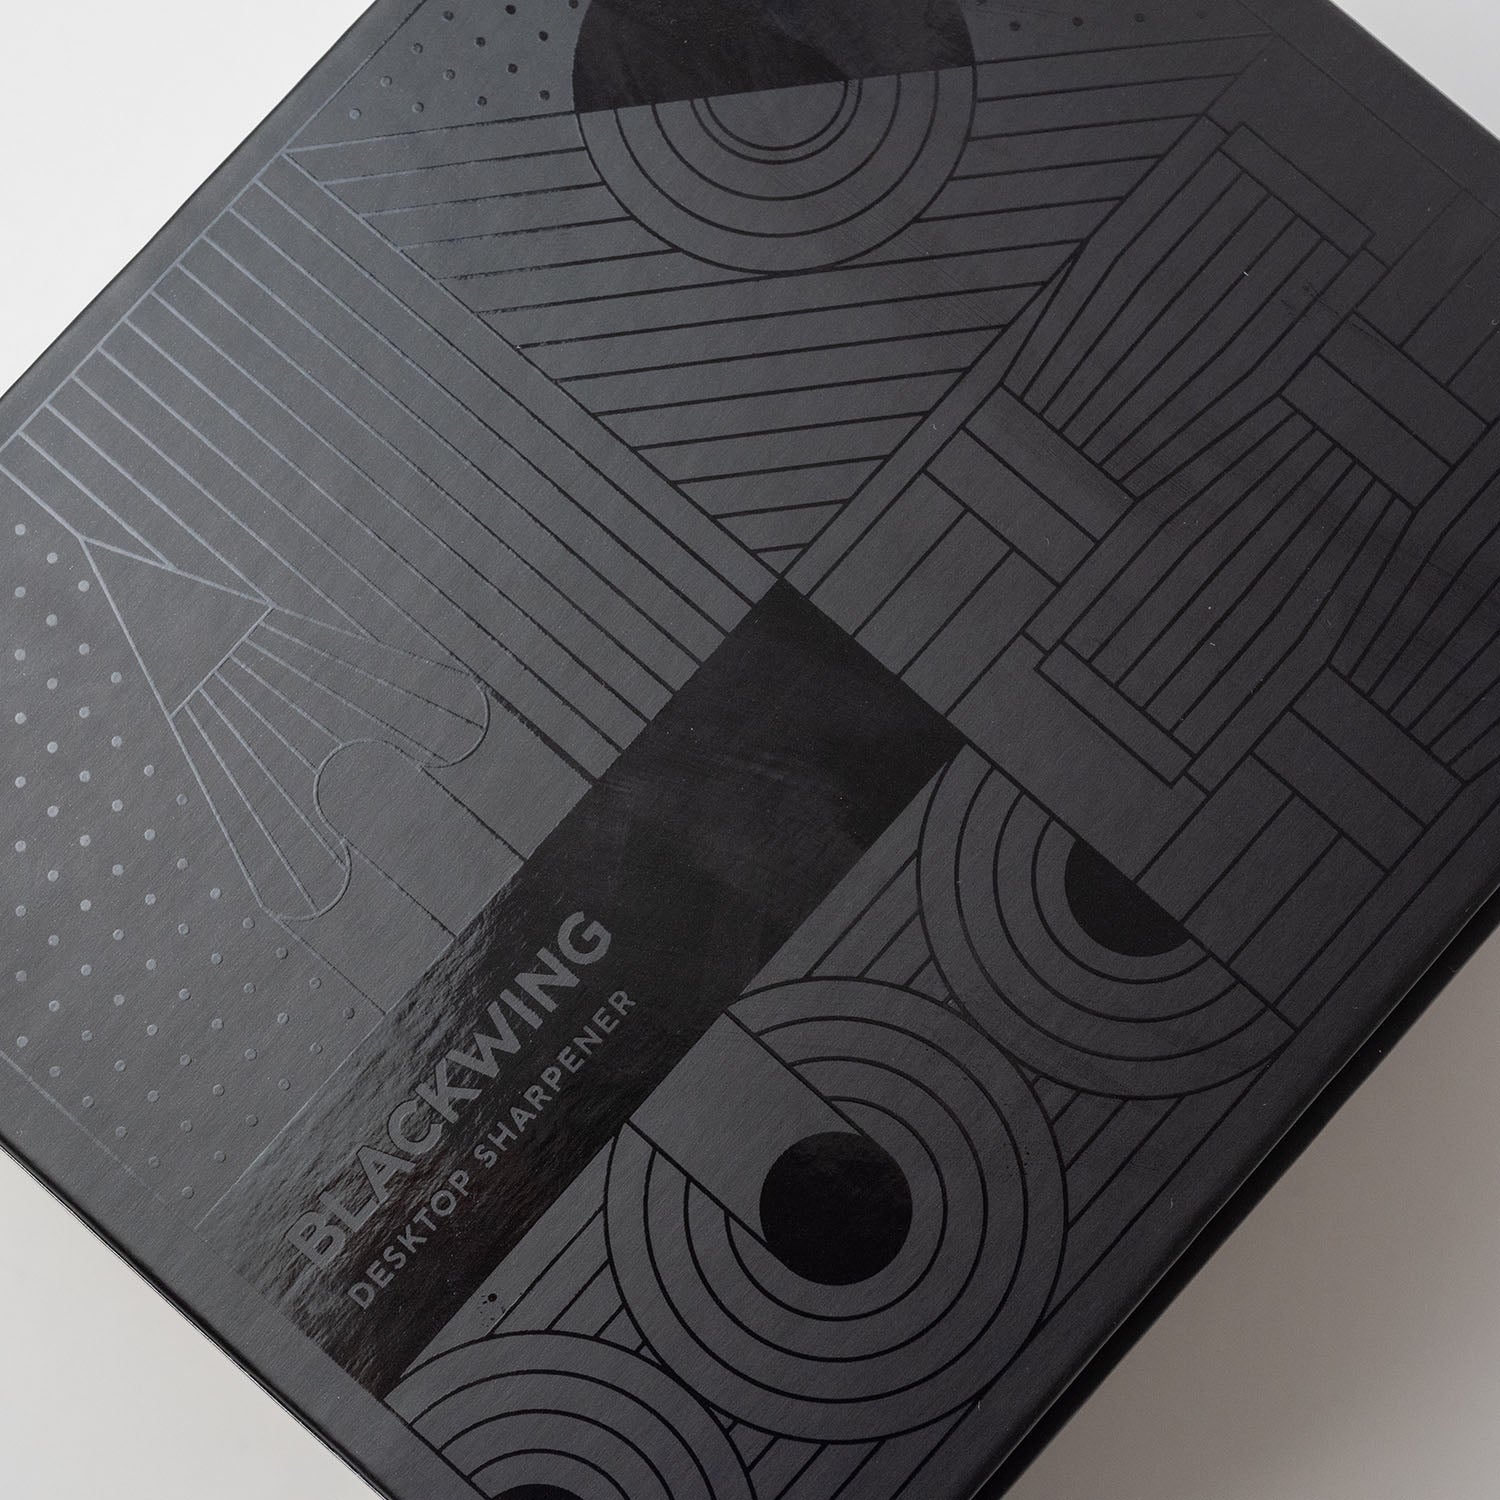 A black box with geometric designs, inspired by the Blackwing Desktop Sharpener.